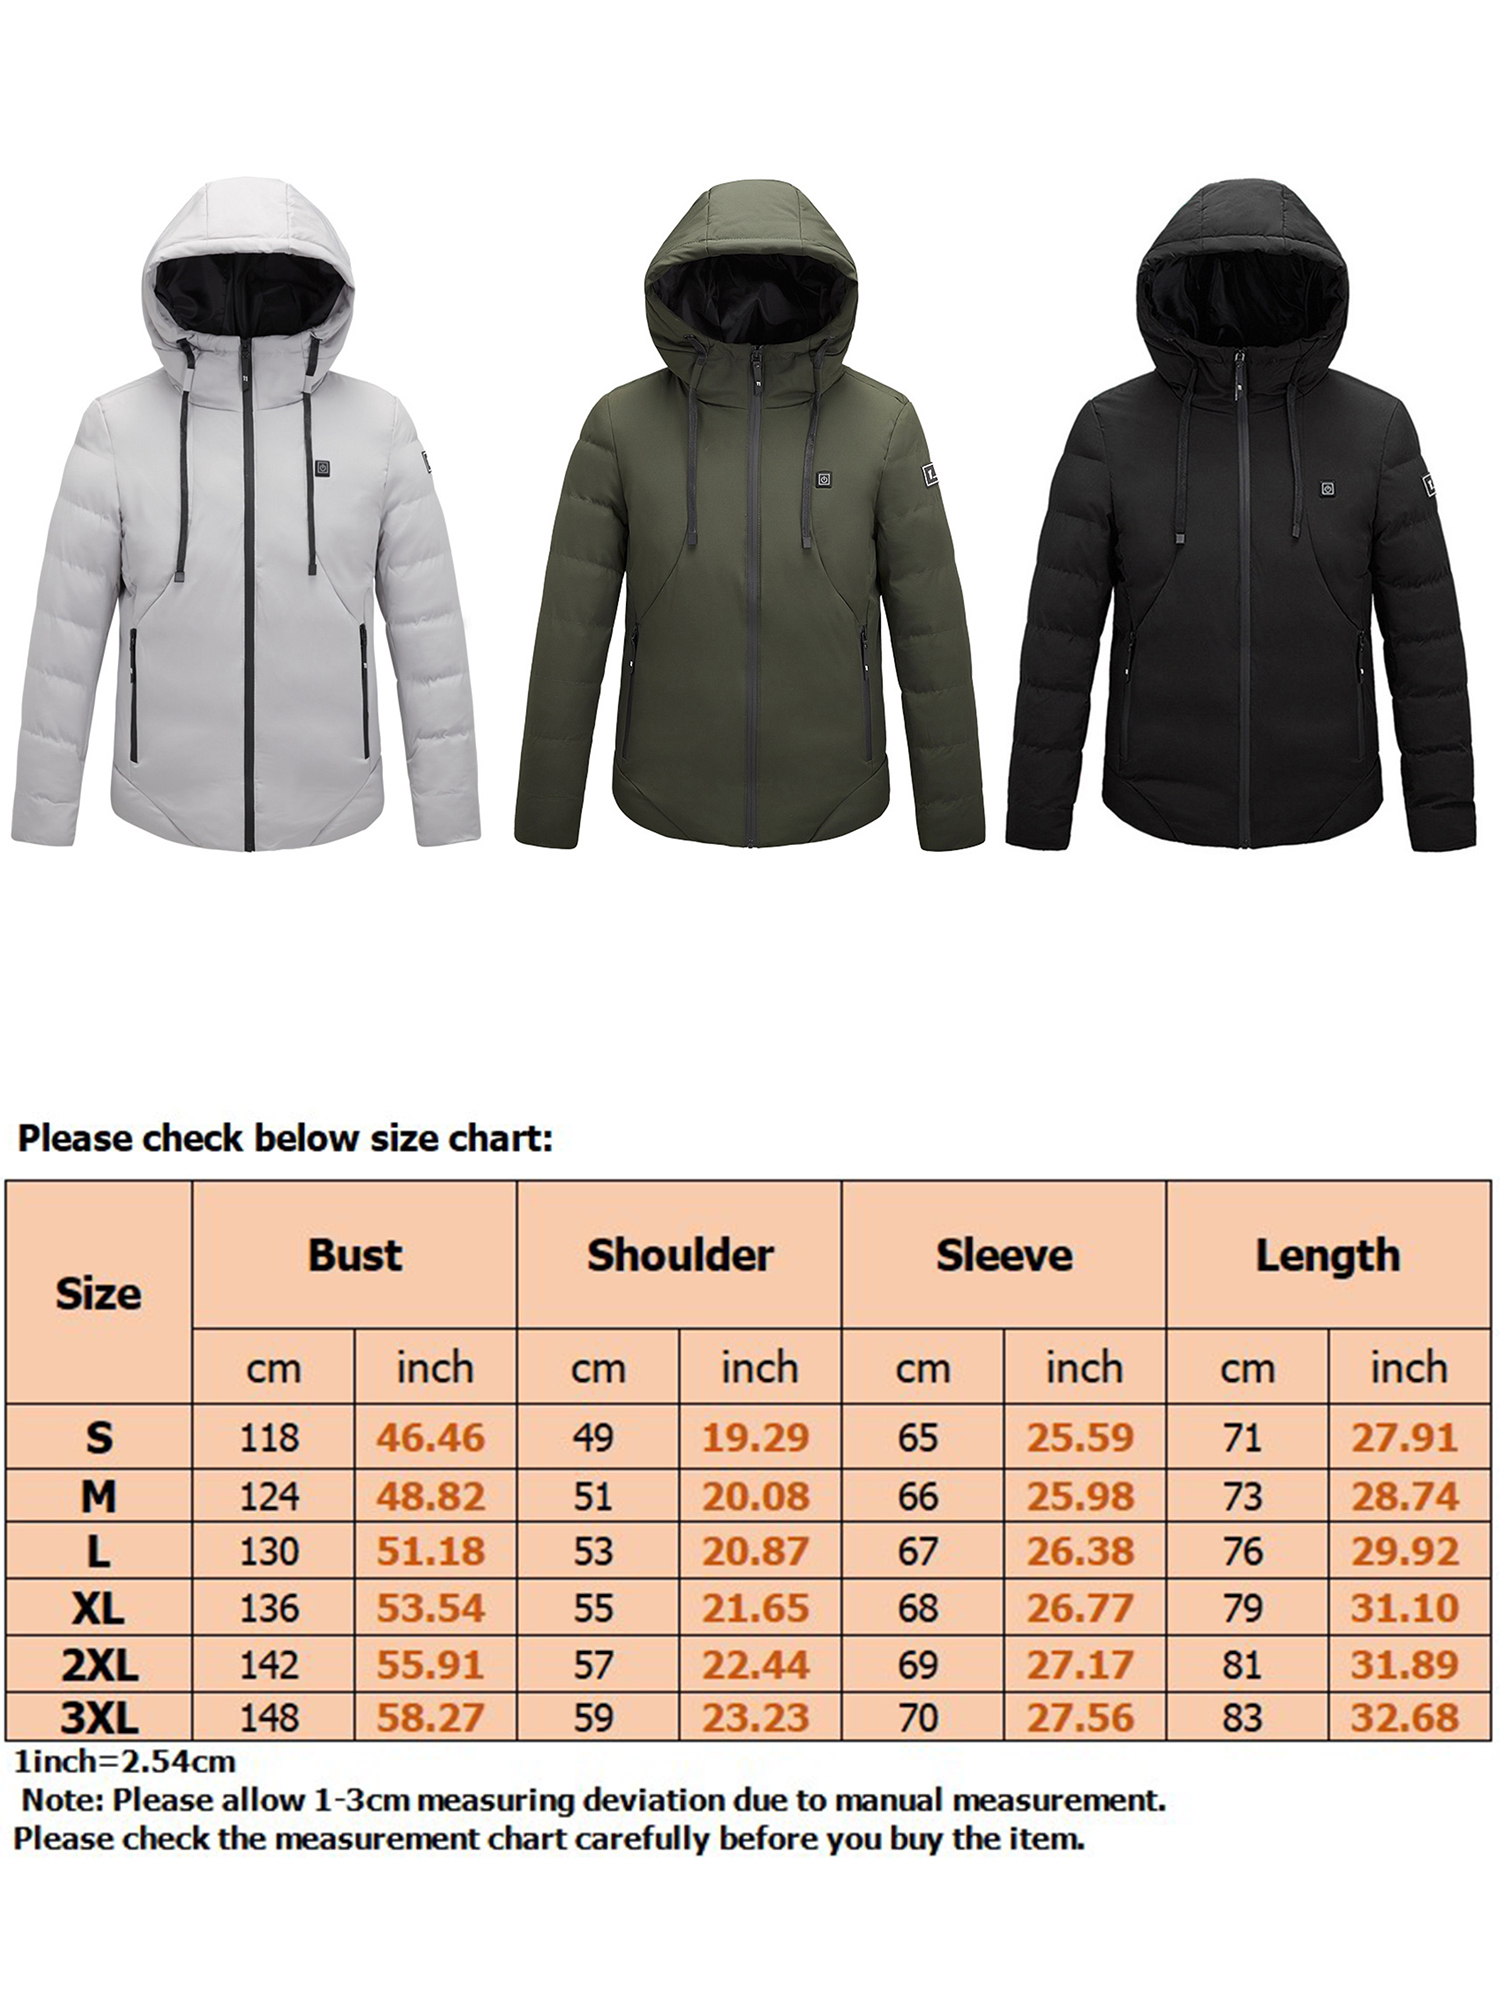 Sexy Dance Men USB Heated Jacket Hooded Down Coat Zipper Long Sleeve Shell Heated Outwear Winter Outdoor Warmth Electric Heating Coat With Power Bank - image 2 of 10